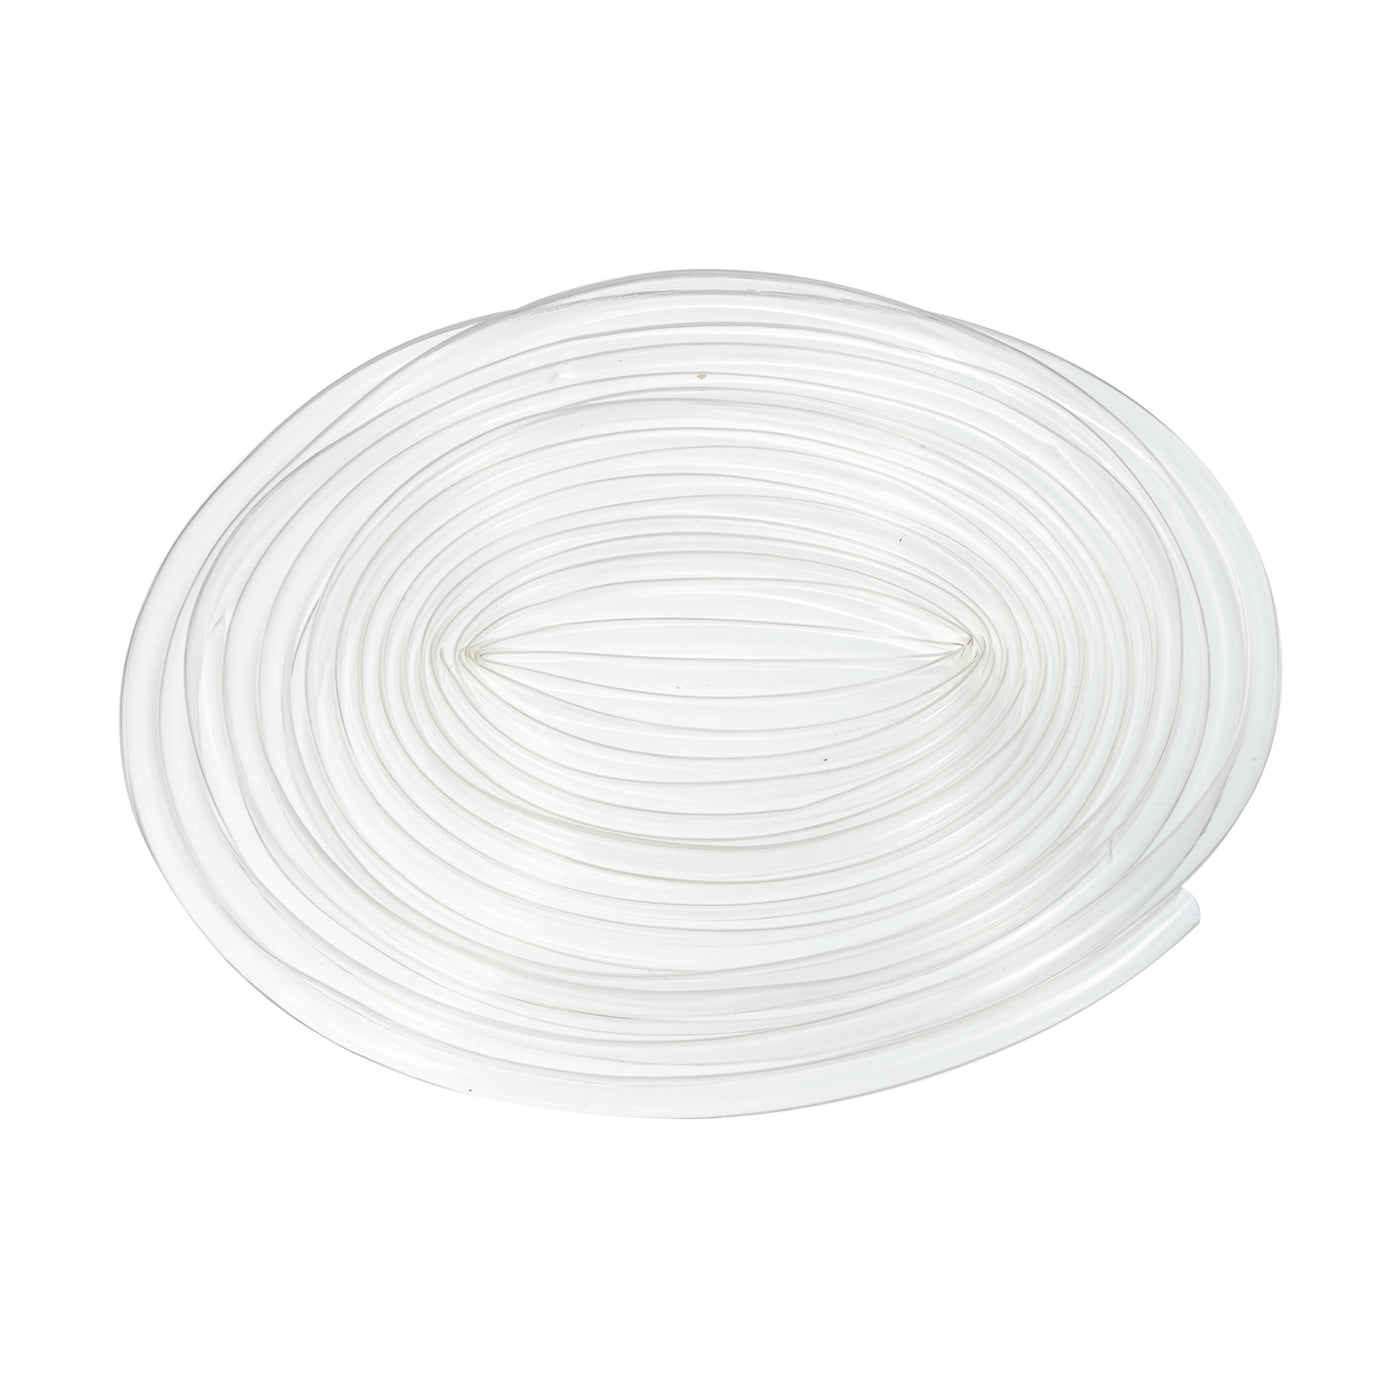 uxcell Uxcell Clear PVC Tube Wire Harness Tubing, 1/4-inch(6mm) ID 23ft Sleeve for Wire Sheathing Wire Protection